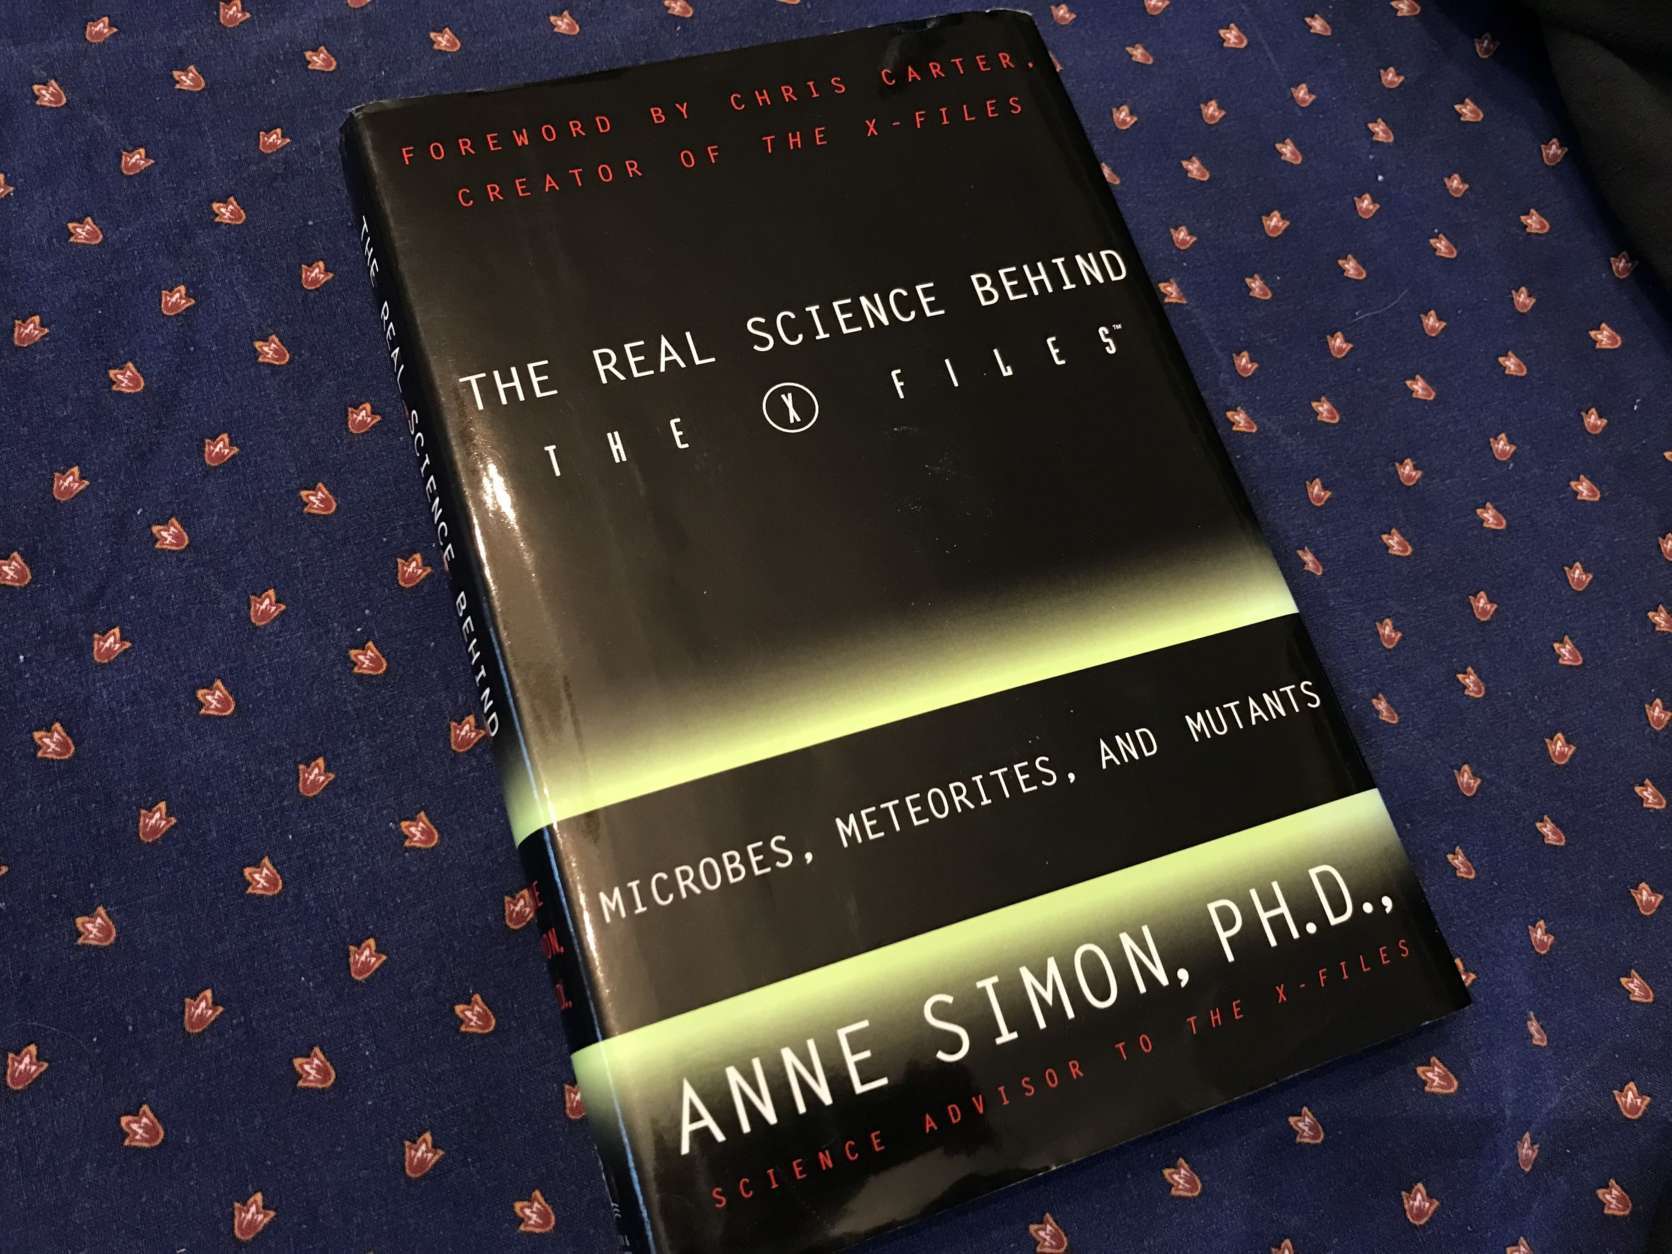 As science adviser for "The X-Files," University of Maryland virologist Anne Simon wrote a book detailing the facts behind the series. (WTOP/Michelle Basch)